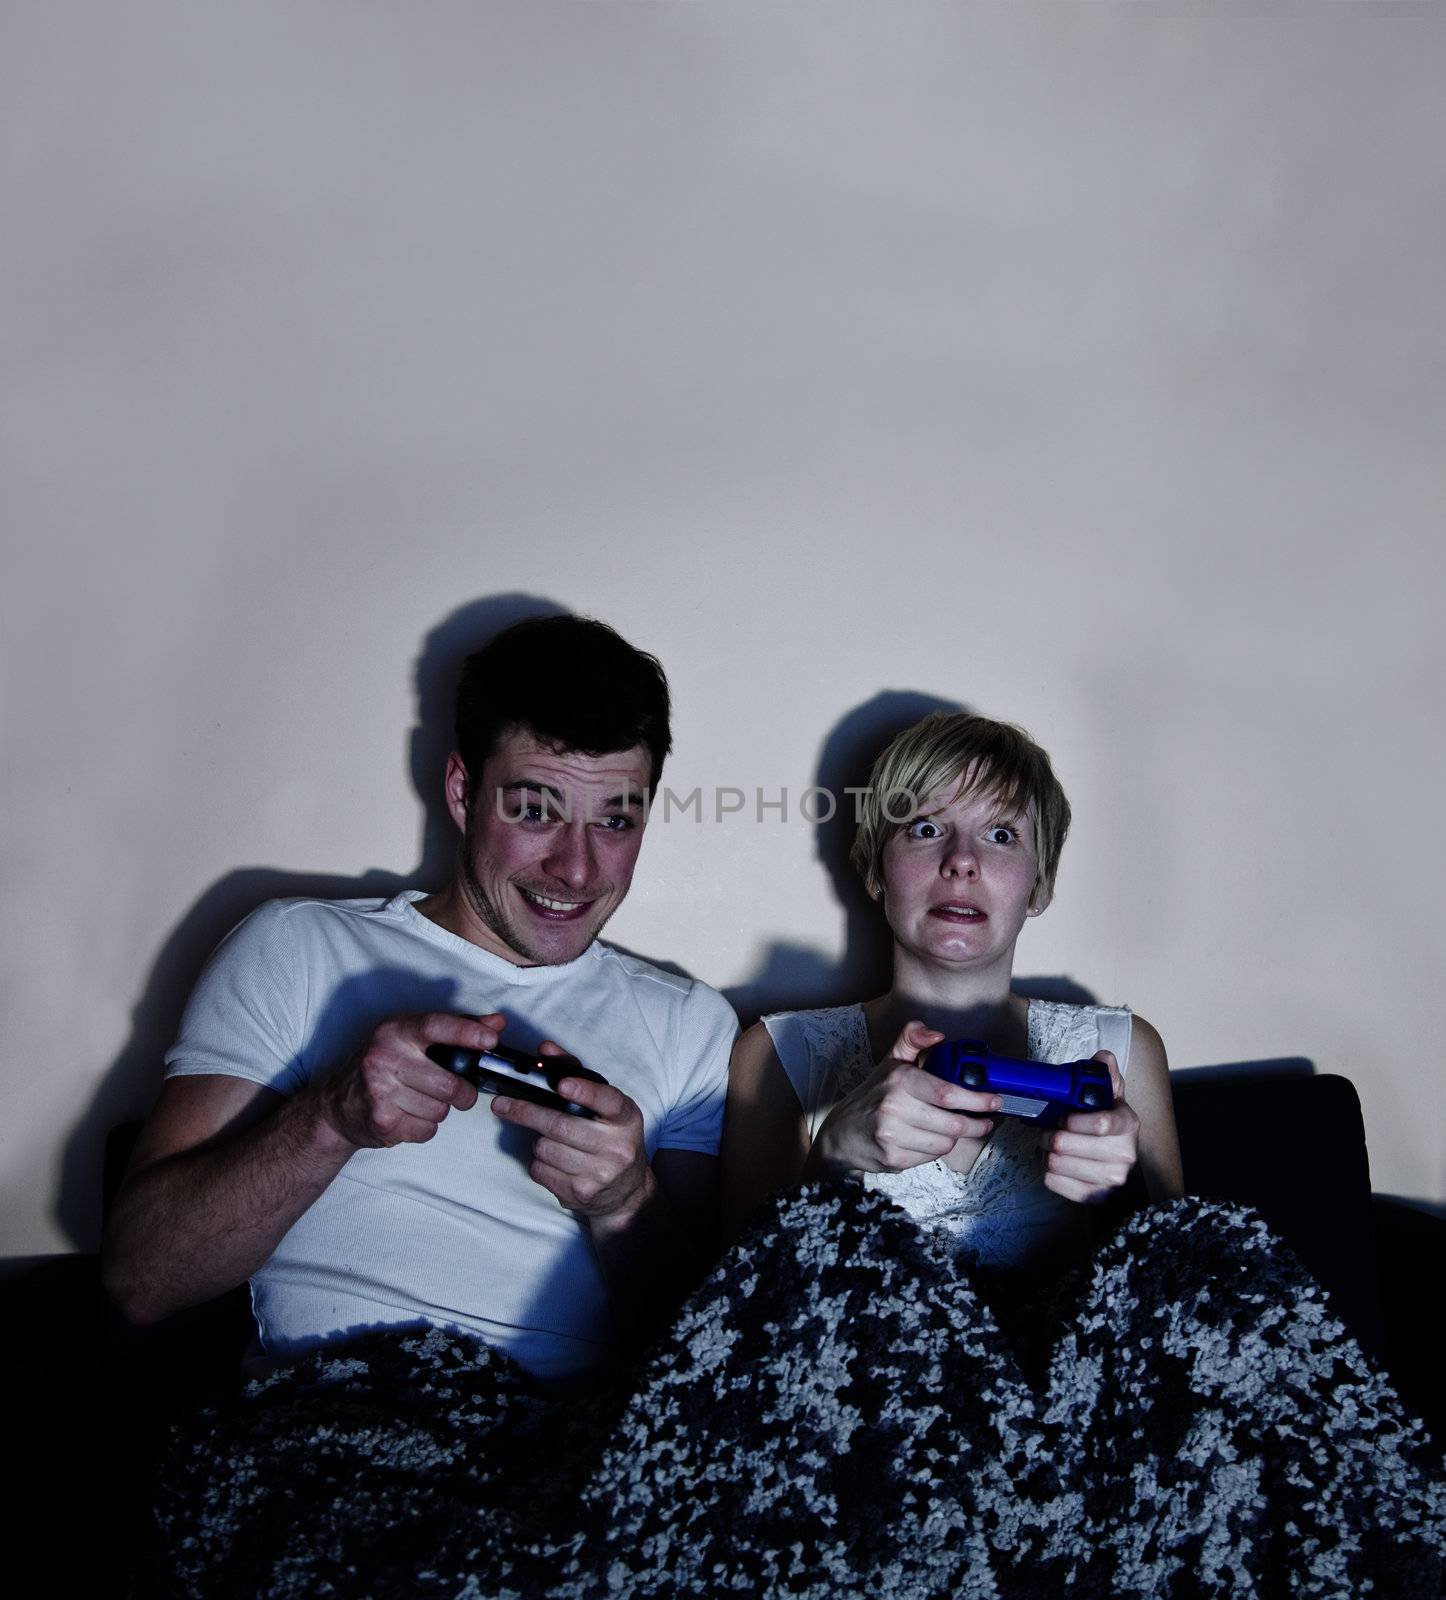 Series of images of a young person / couple sitting on a couch wrapped and listening to the television